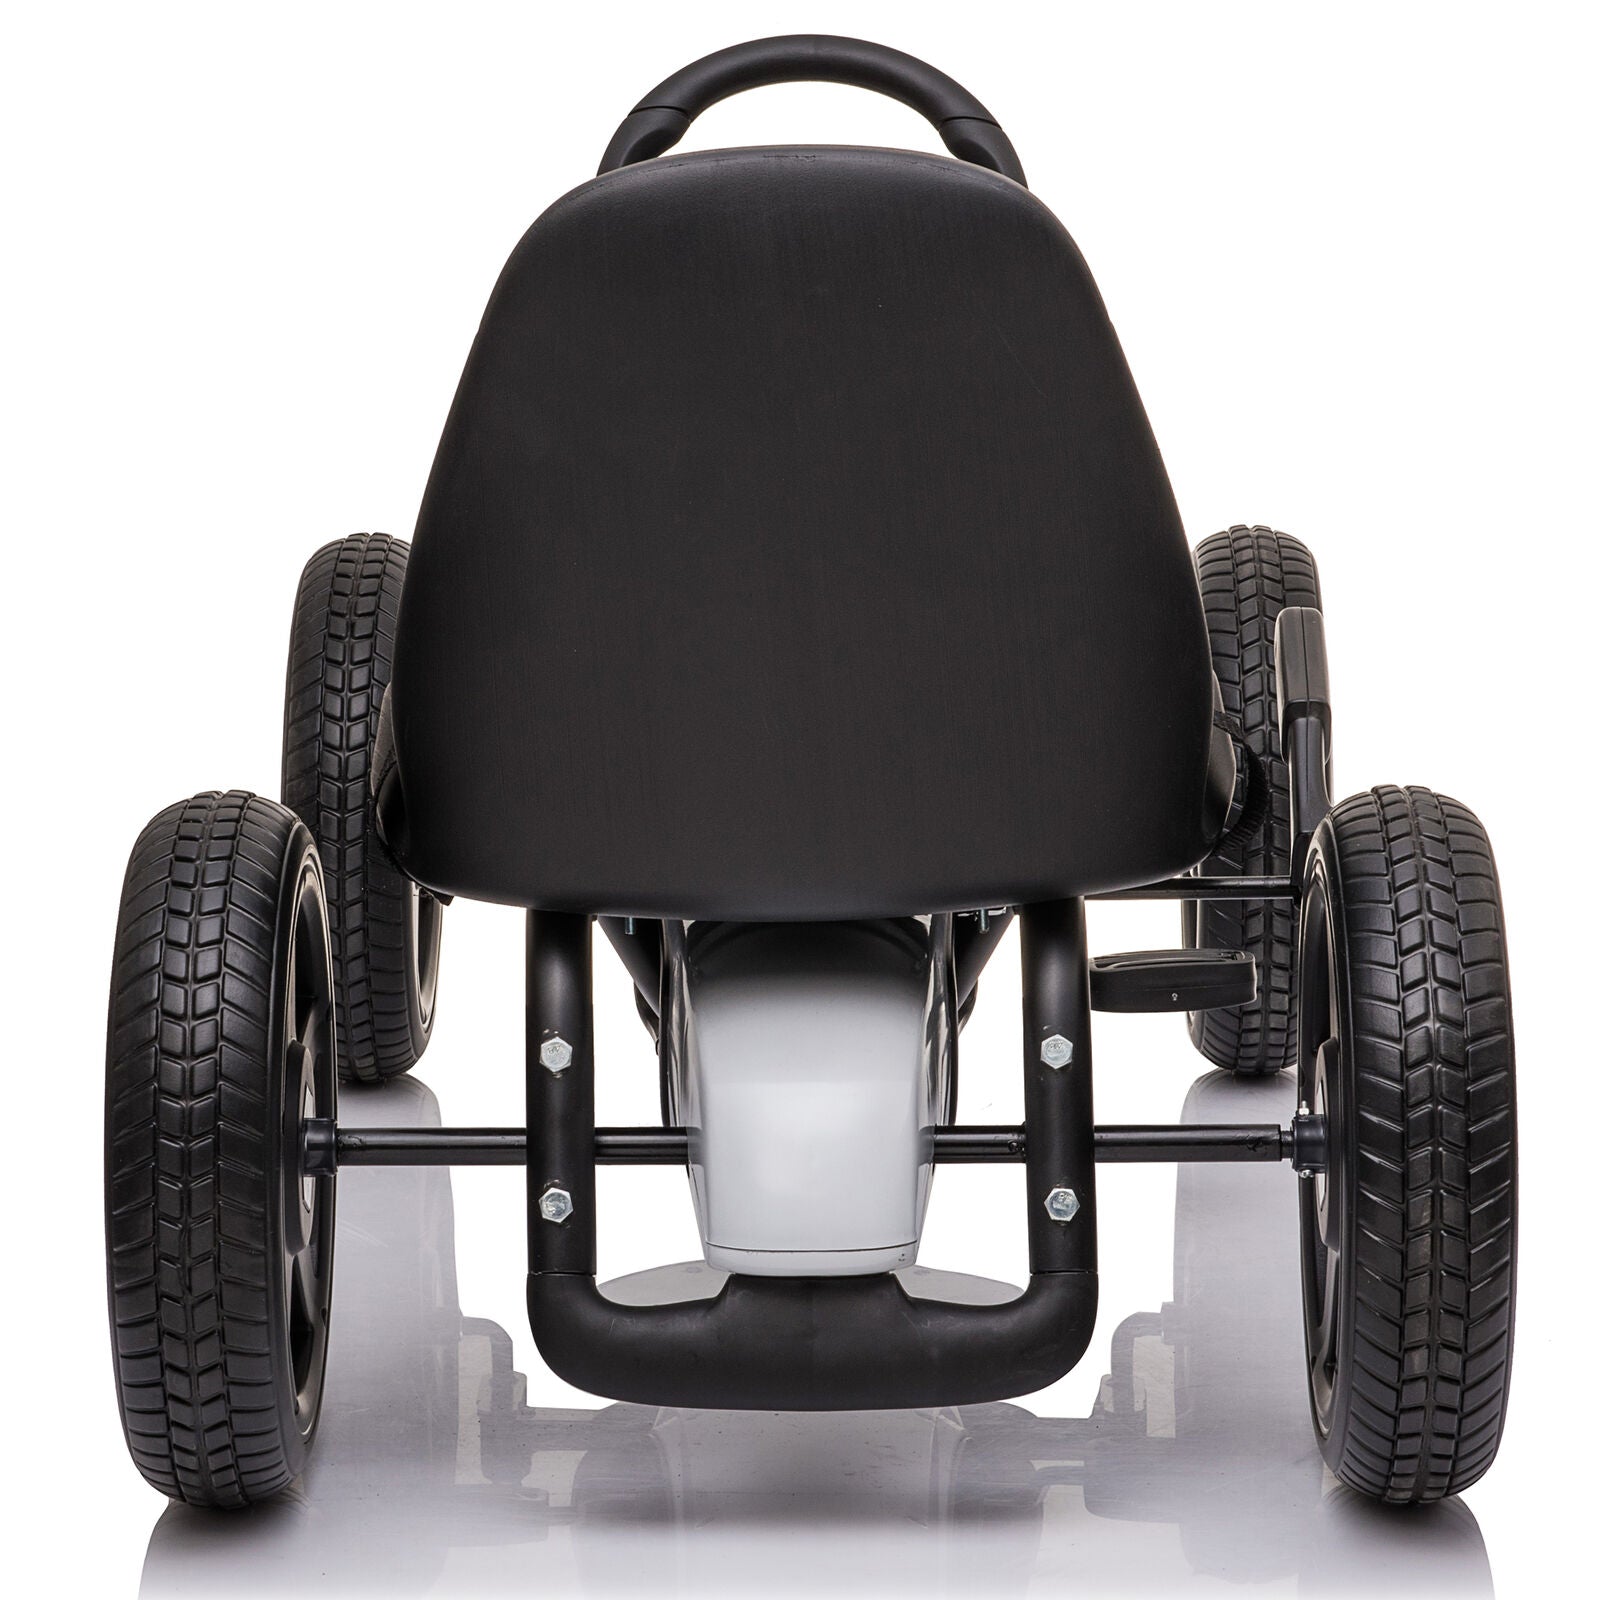 (Out of Stock) Mercedes Benz  Pedal Powered Kids Ride on Car 4 Wheel Outdoor Racer Toy w/ Adjustable Seat & Manual Brake